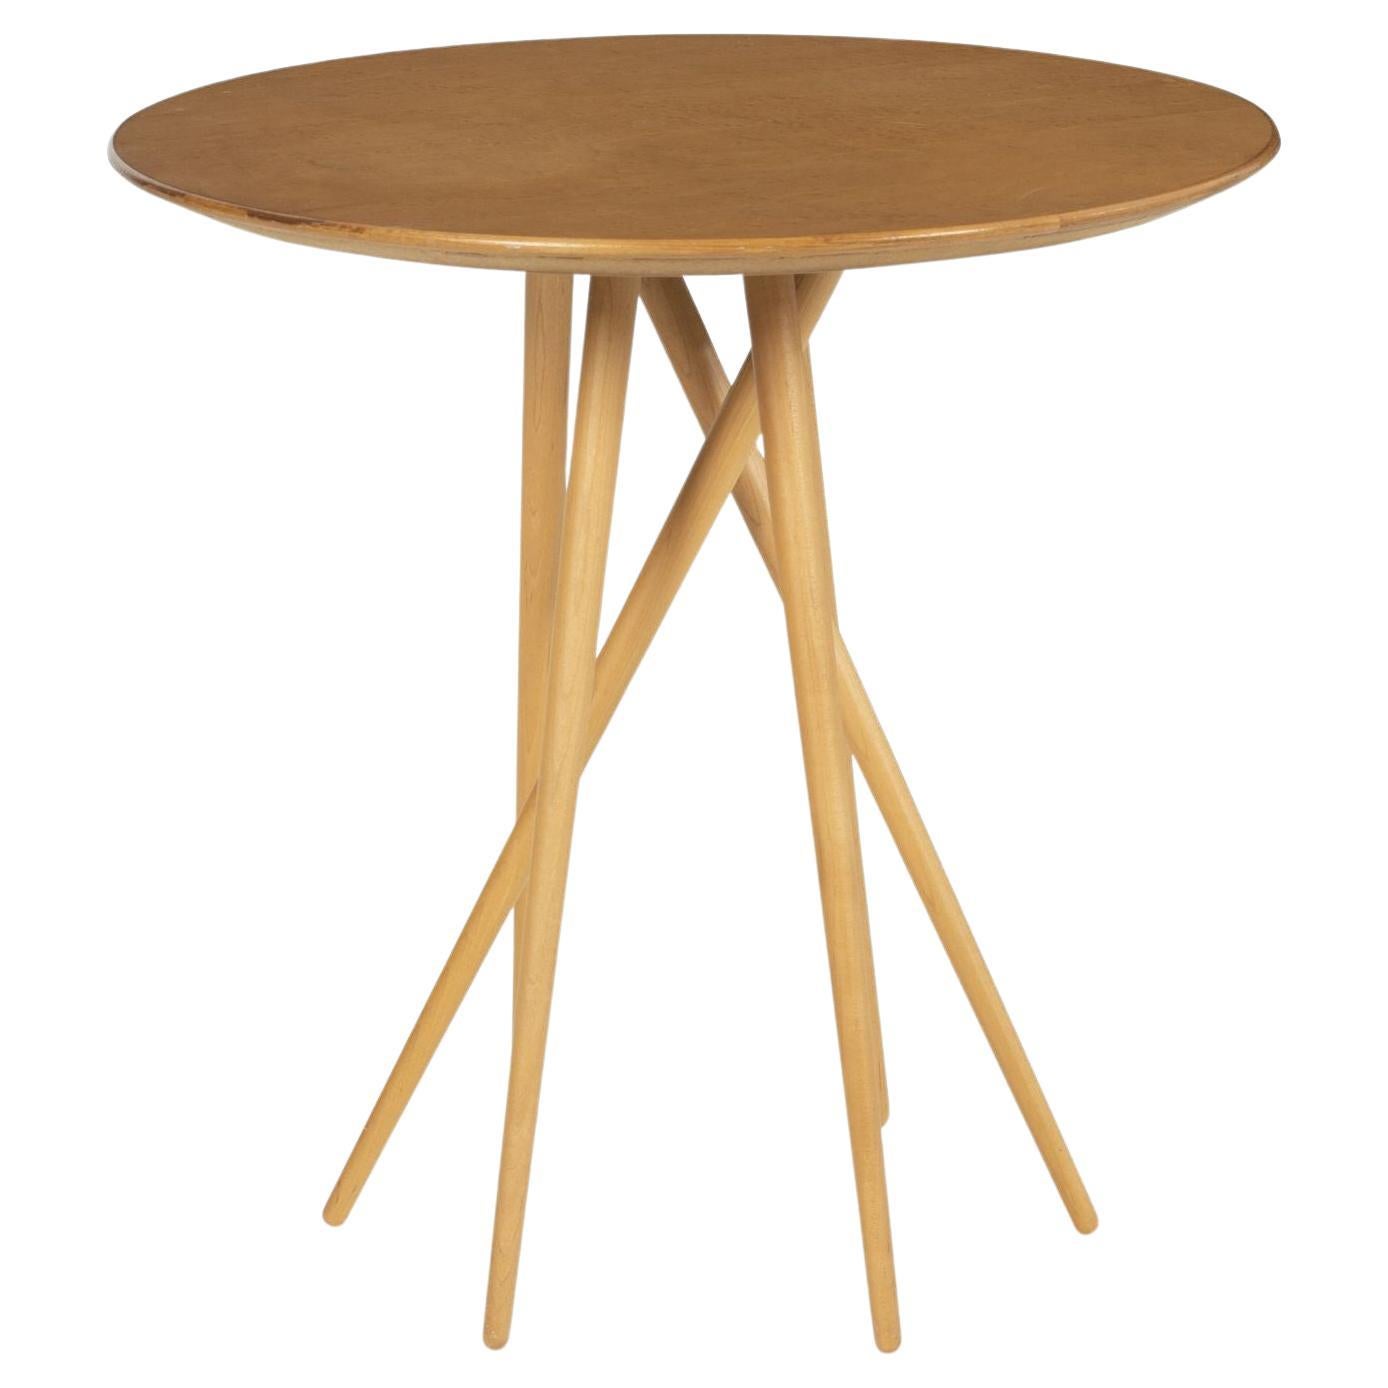 Lawrence Laske Toothpick Cactus Table for Knoll Studio, model 81TR20 For Sale